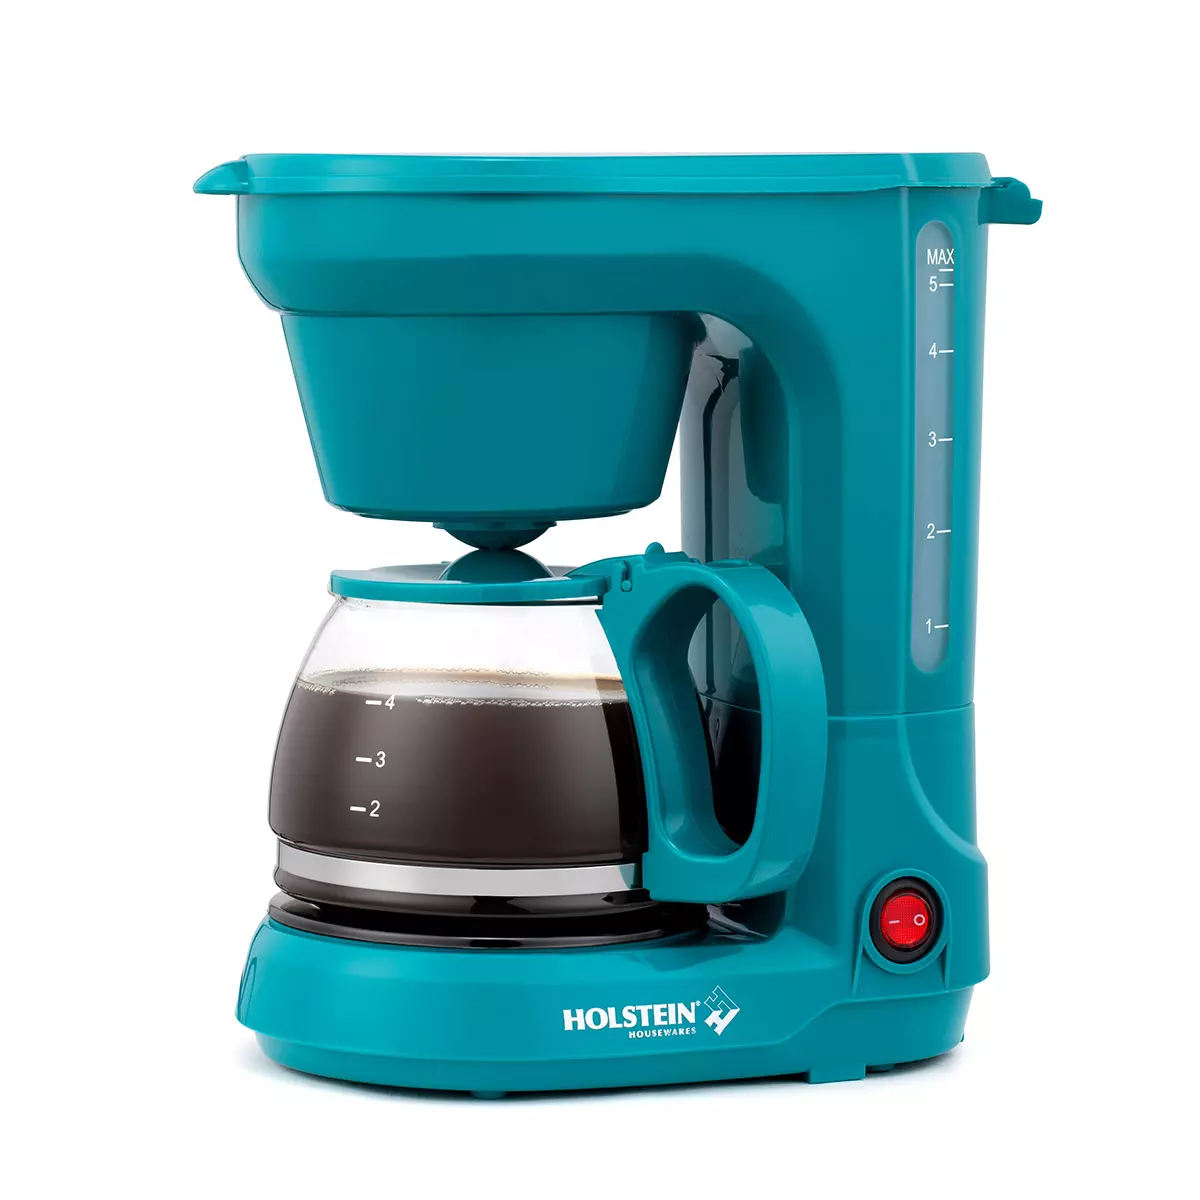 8 Best 5-Cup Coffee Makers 2018 